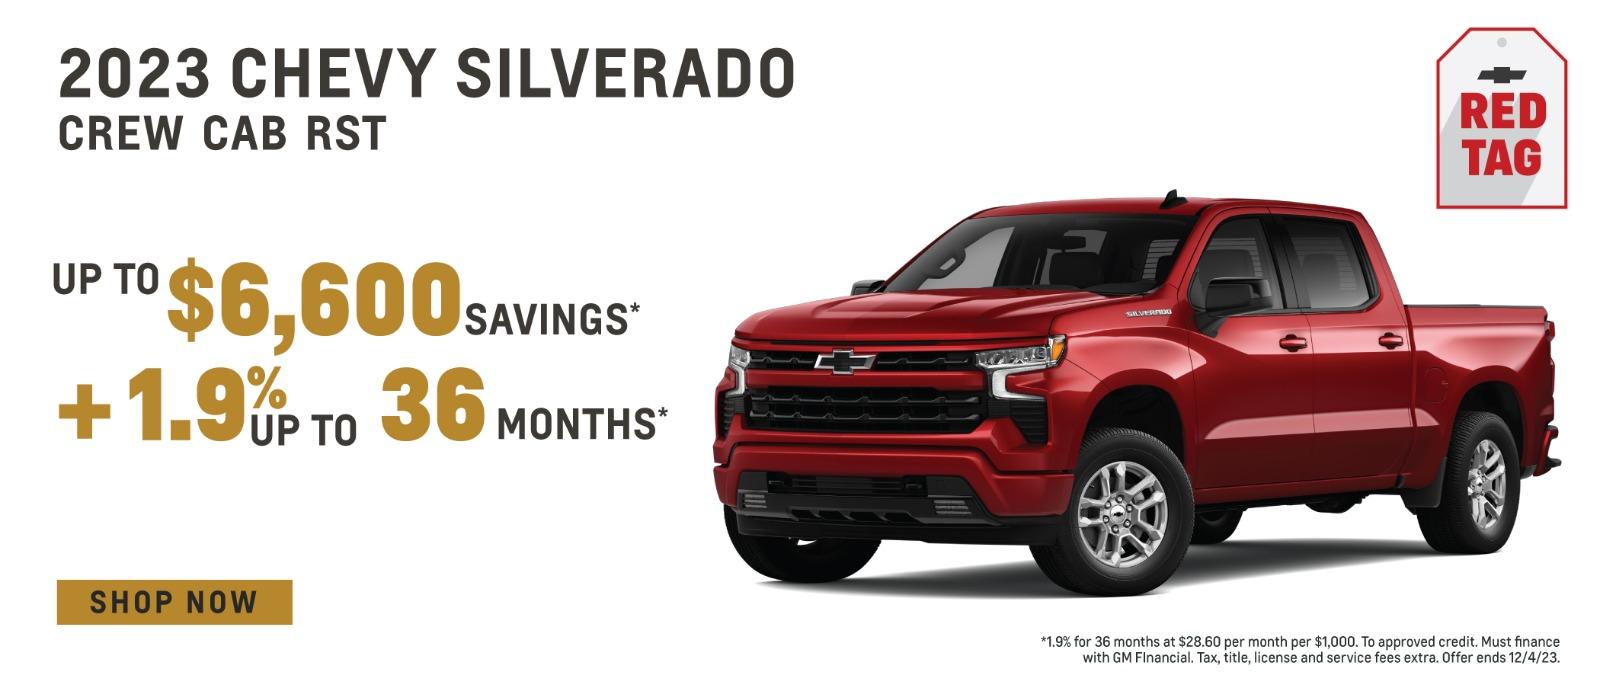 2023 Chevy Silverado Crew Cab Up To $6,600 savings + 1.9% up to 36 months